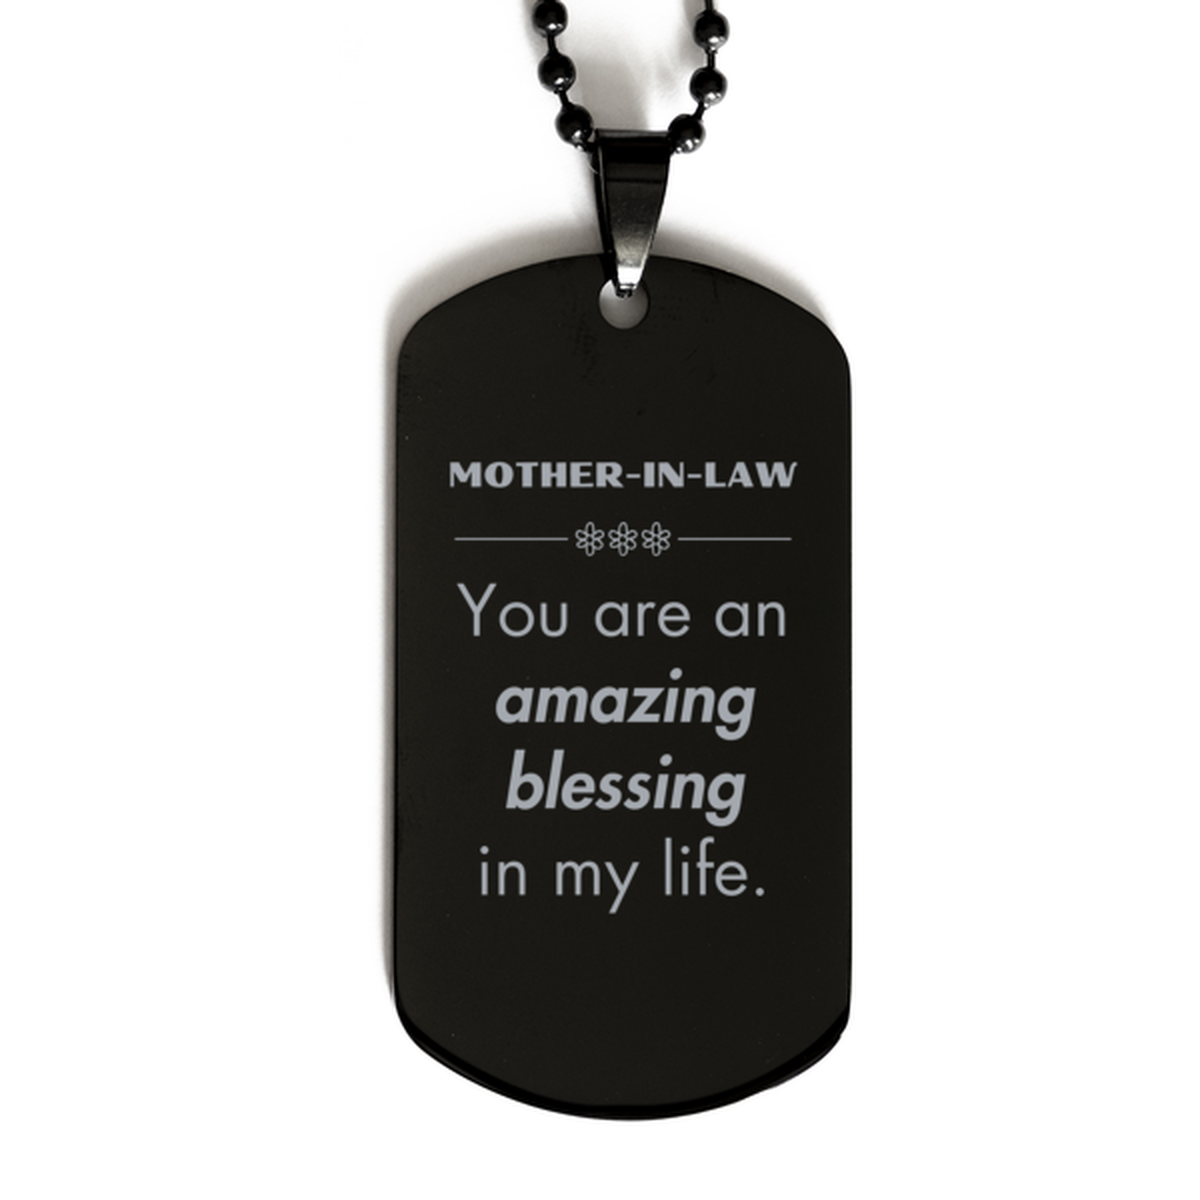 Mother-In-Law Black Dog Tag, You are an amazing blessing in my life, Thank You Gifts For Mother-In-Law, Inspirational Birthday Christmas Unique Gifts For Mother-In-Law